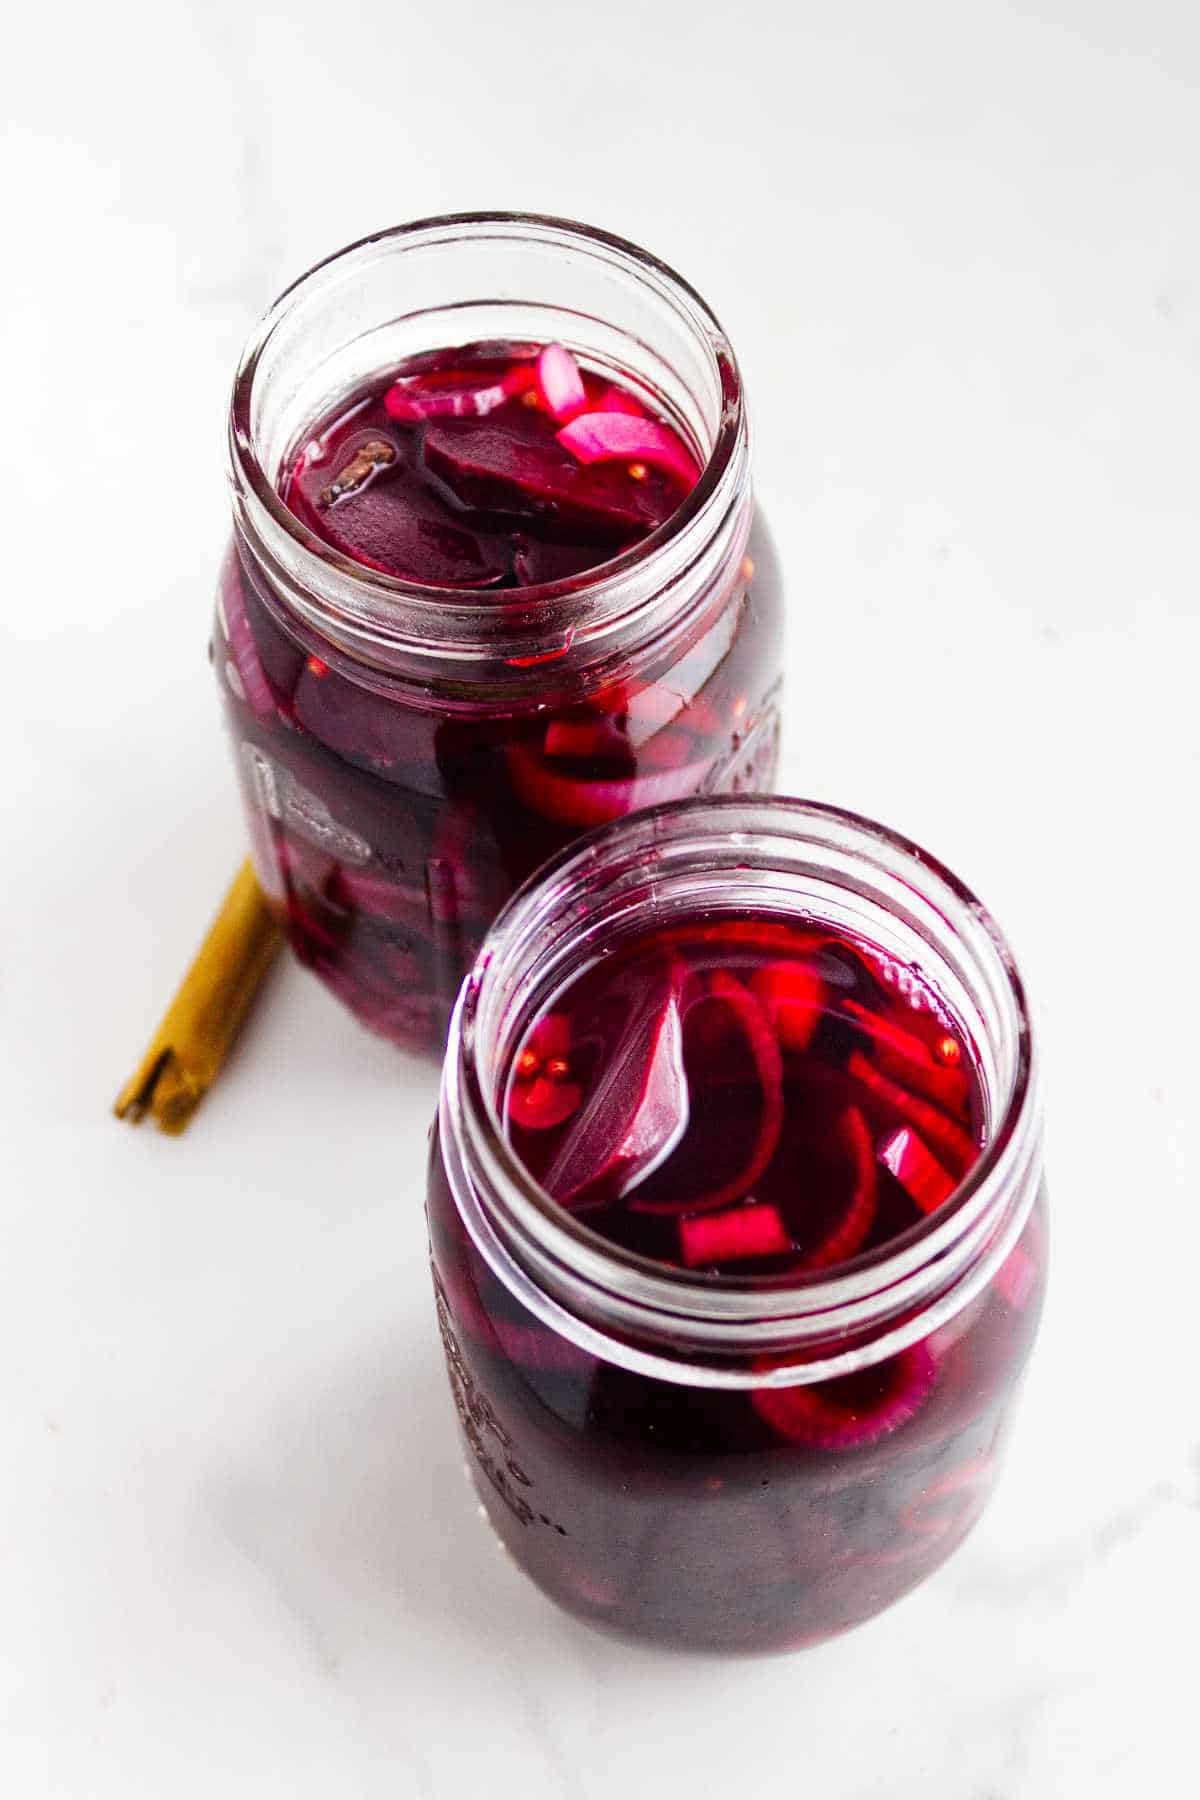 hot brine added to cover beetroot slices in mason jars.